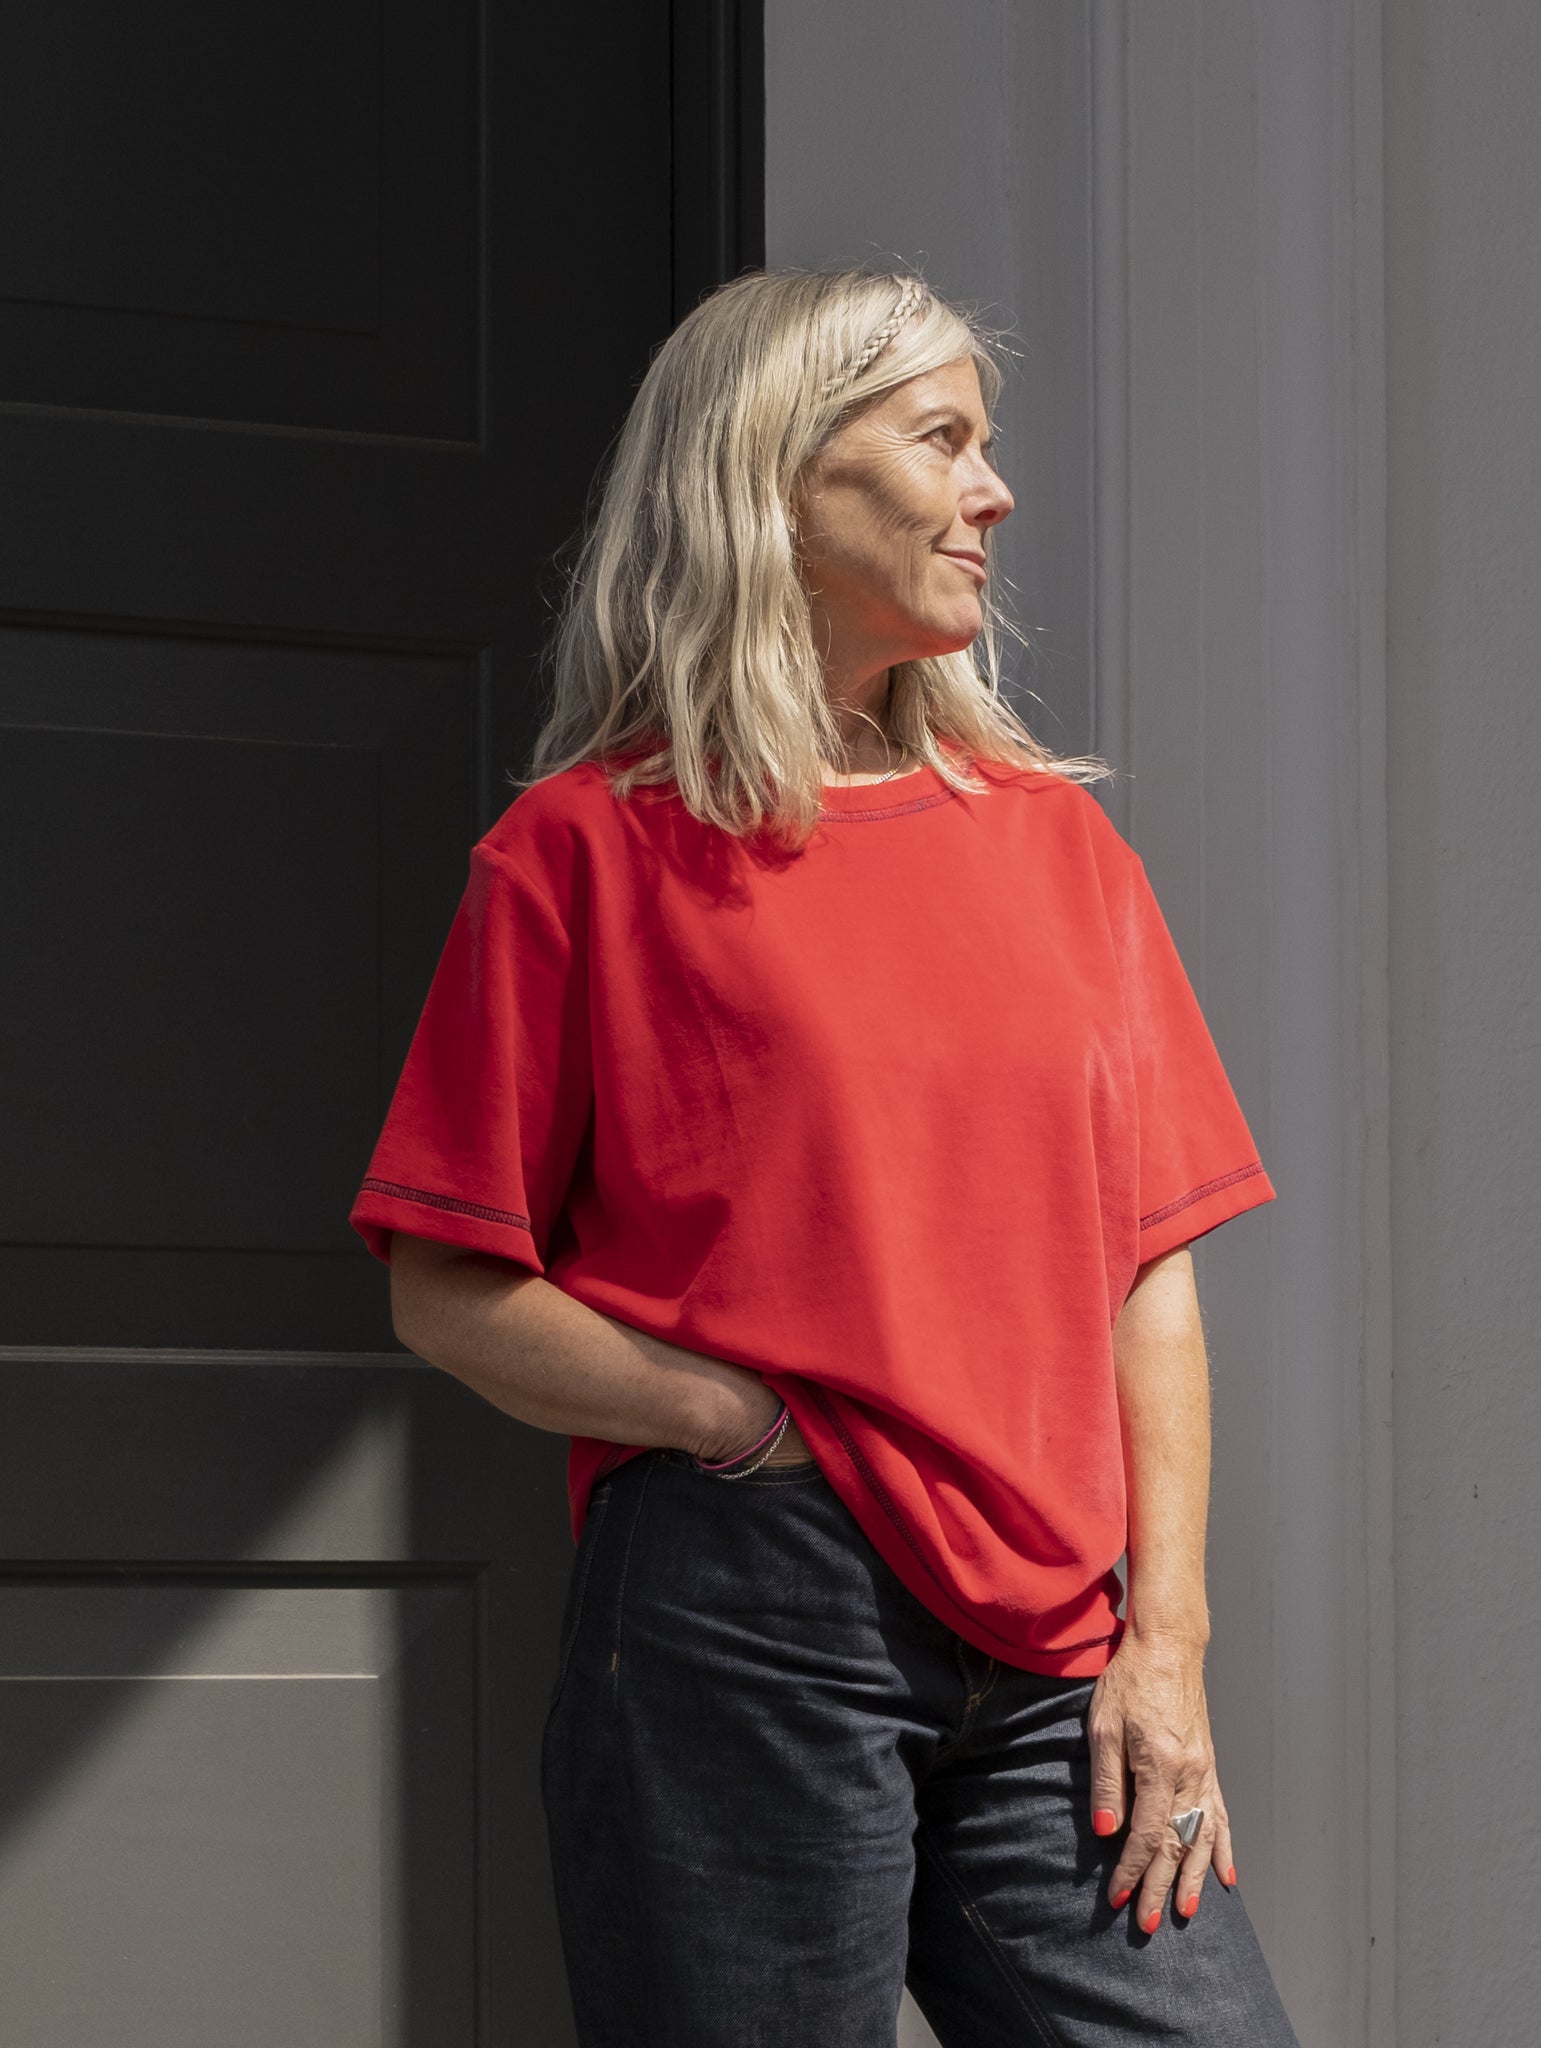 Ella wearing RED VELOUR T-SHIRT with navy contrast overstitch detail